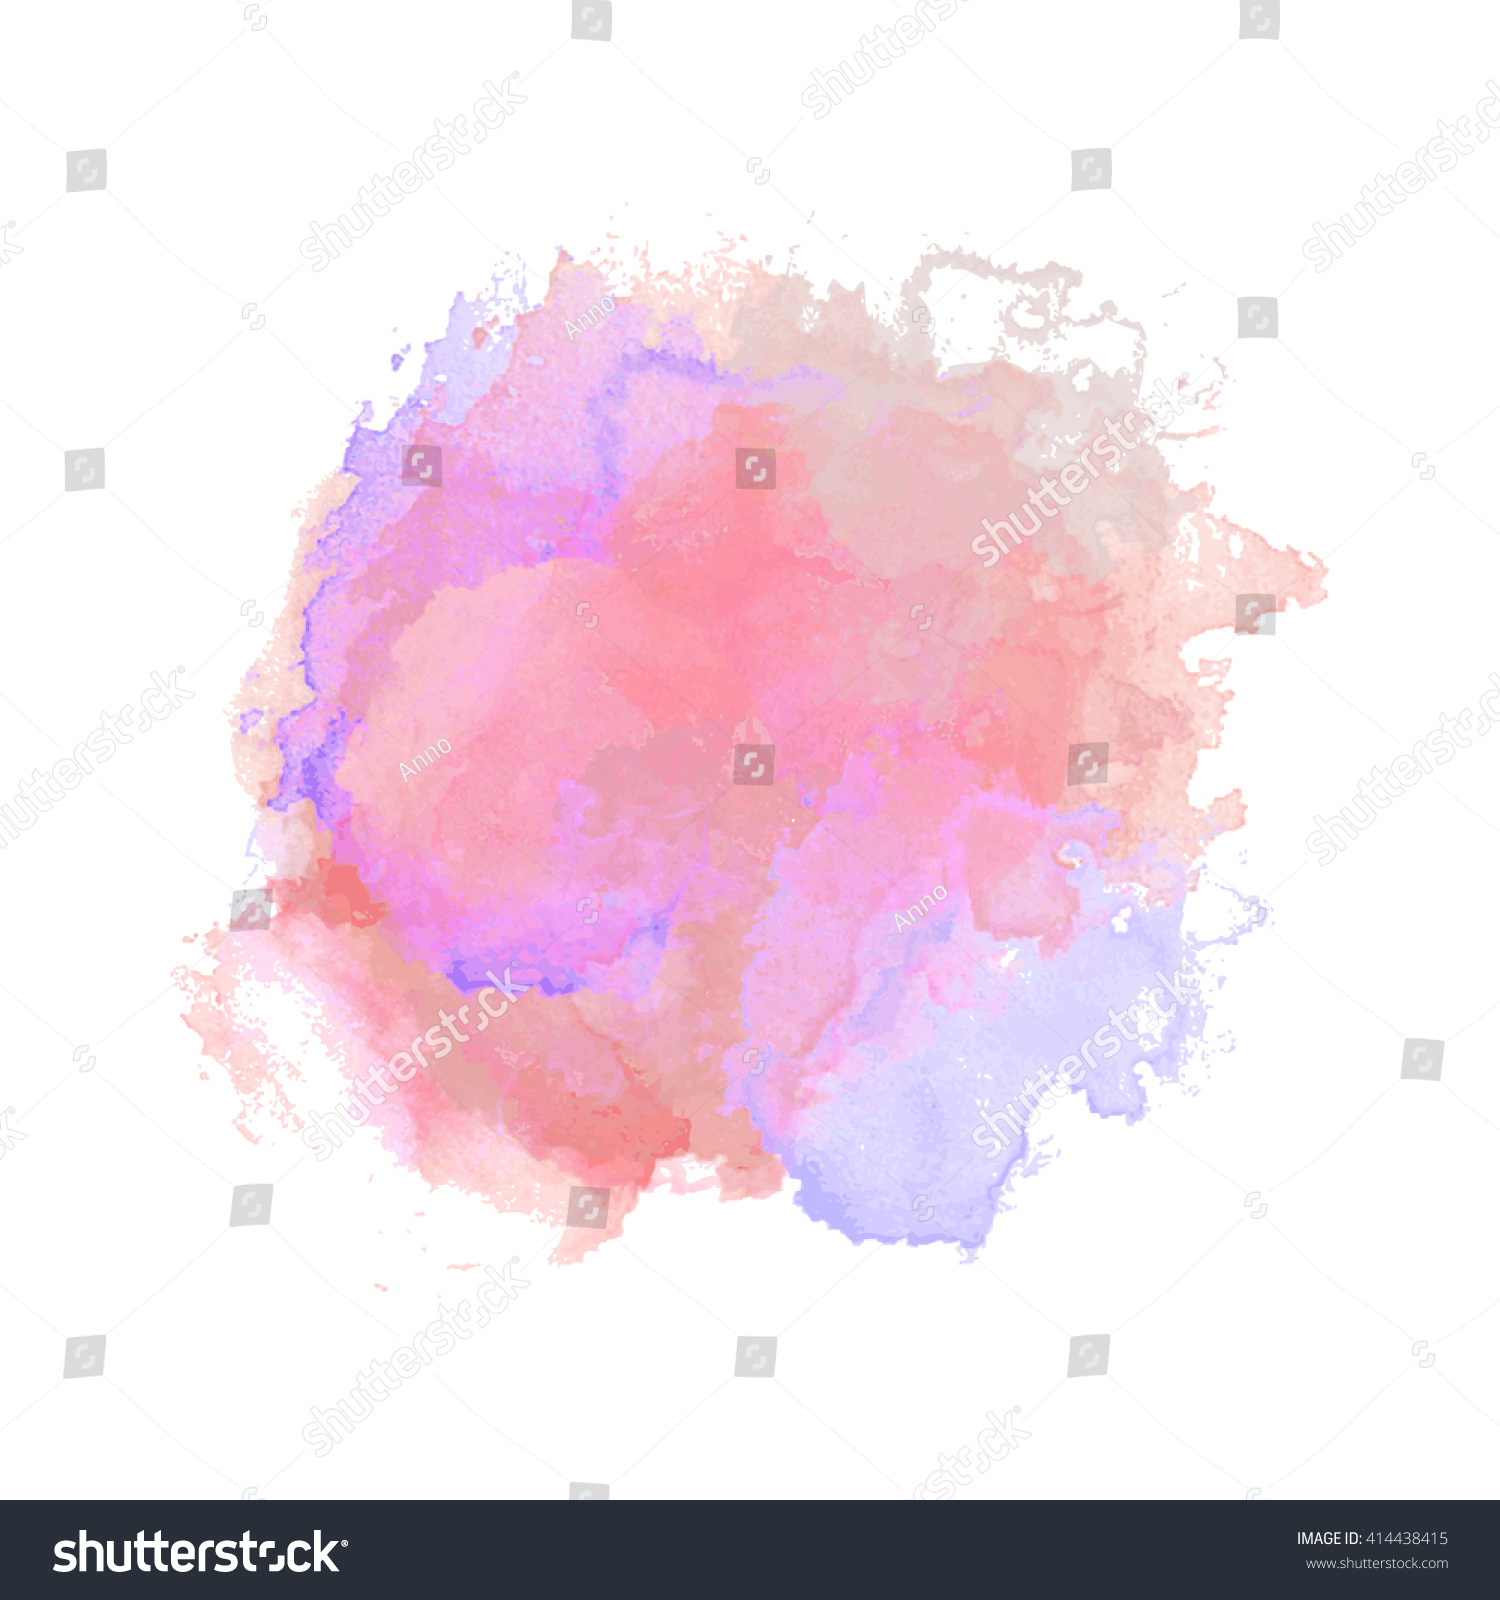 Vector Watercolor Background Isolated Watercolor Texture Stock Vector Royalty Free